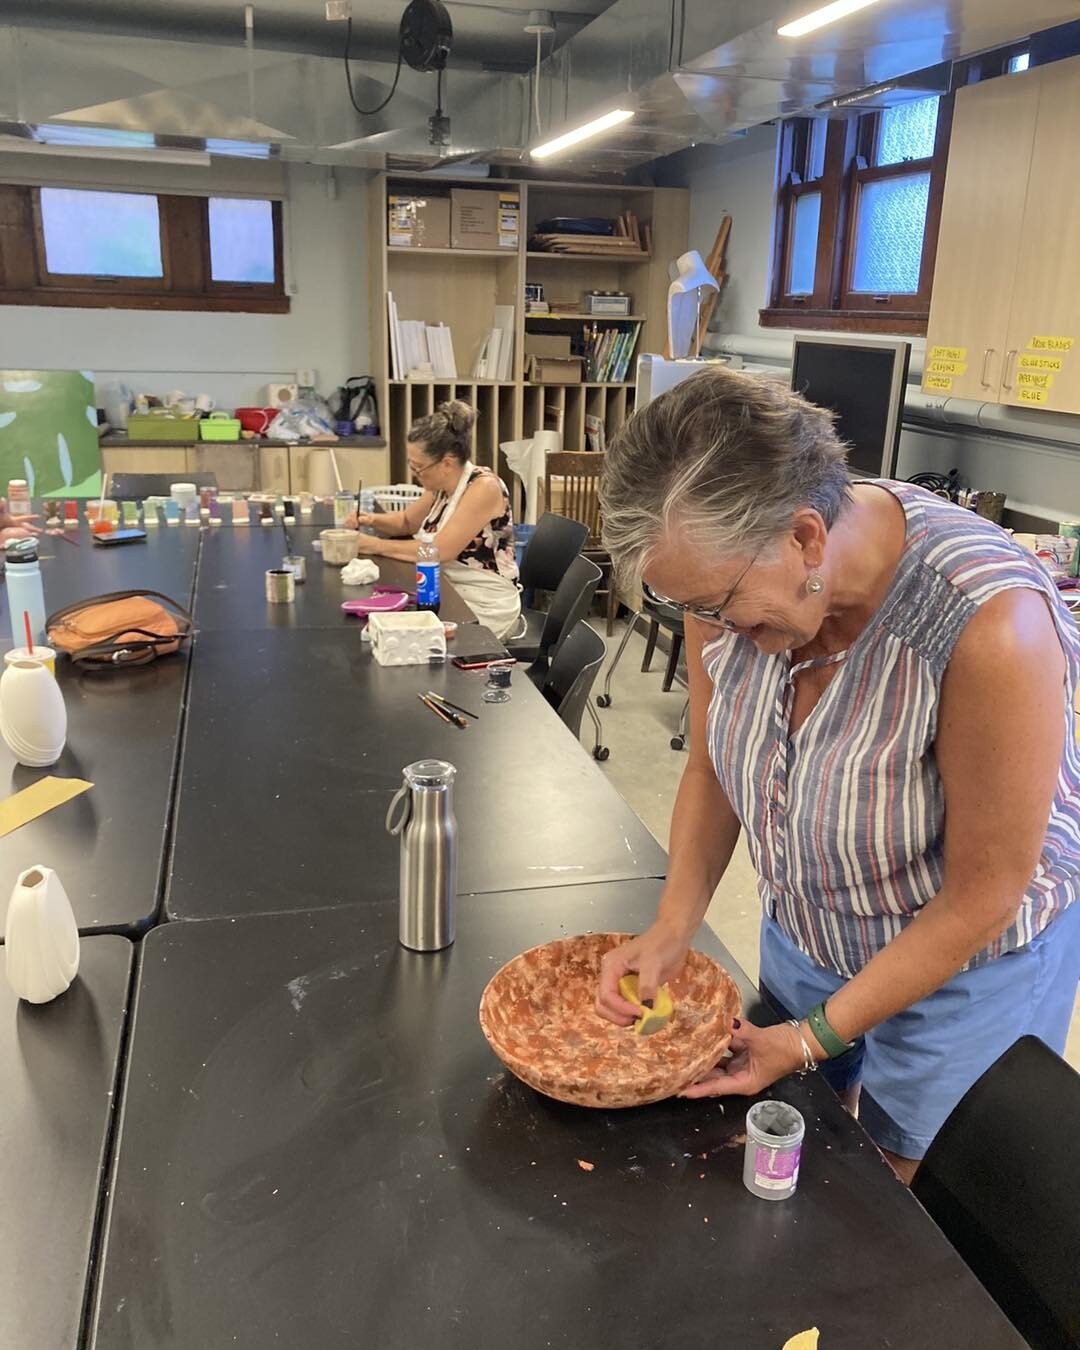 Great bisqueware glazing class last Thursday! Pieces are gettin toasty in the kiln over the weekend, and will be ready to head home in a few days!